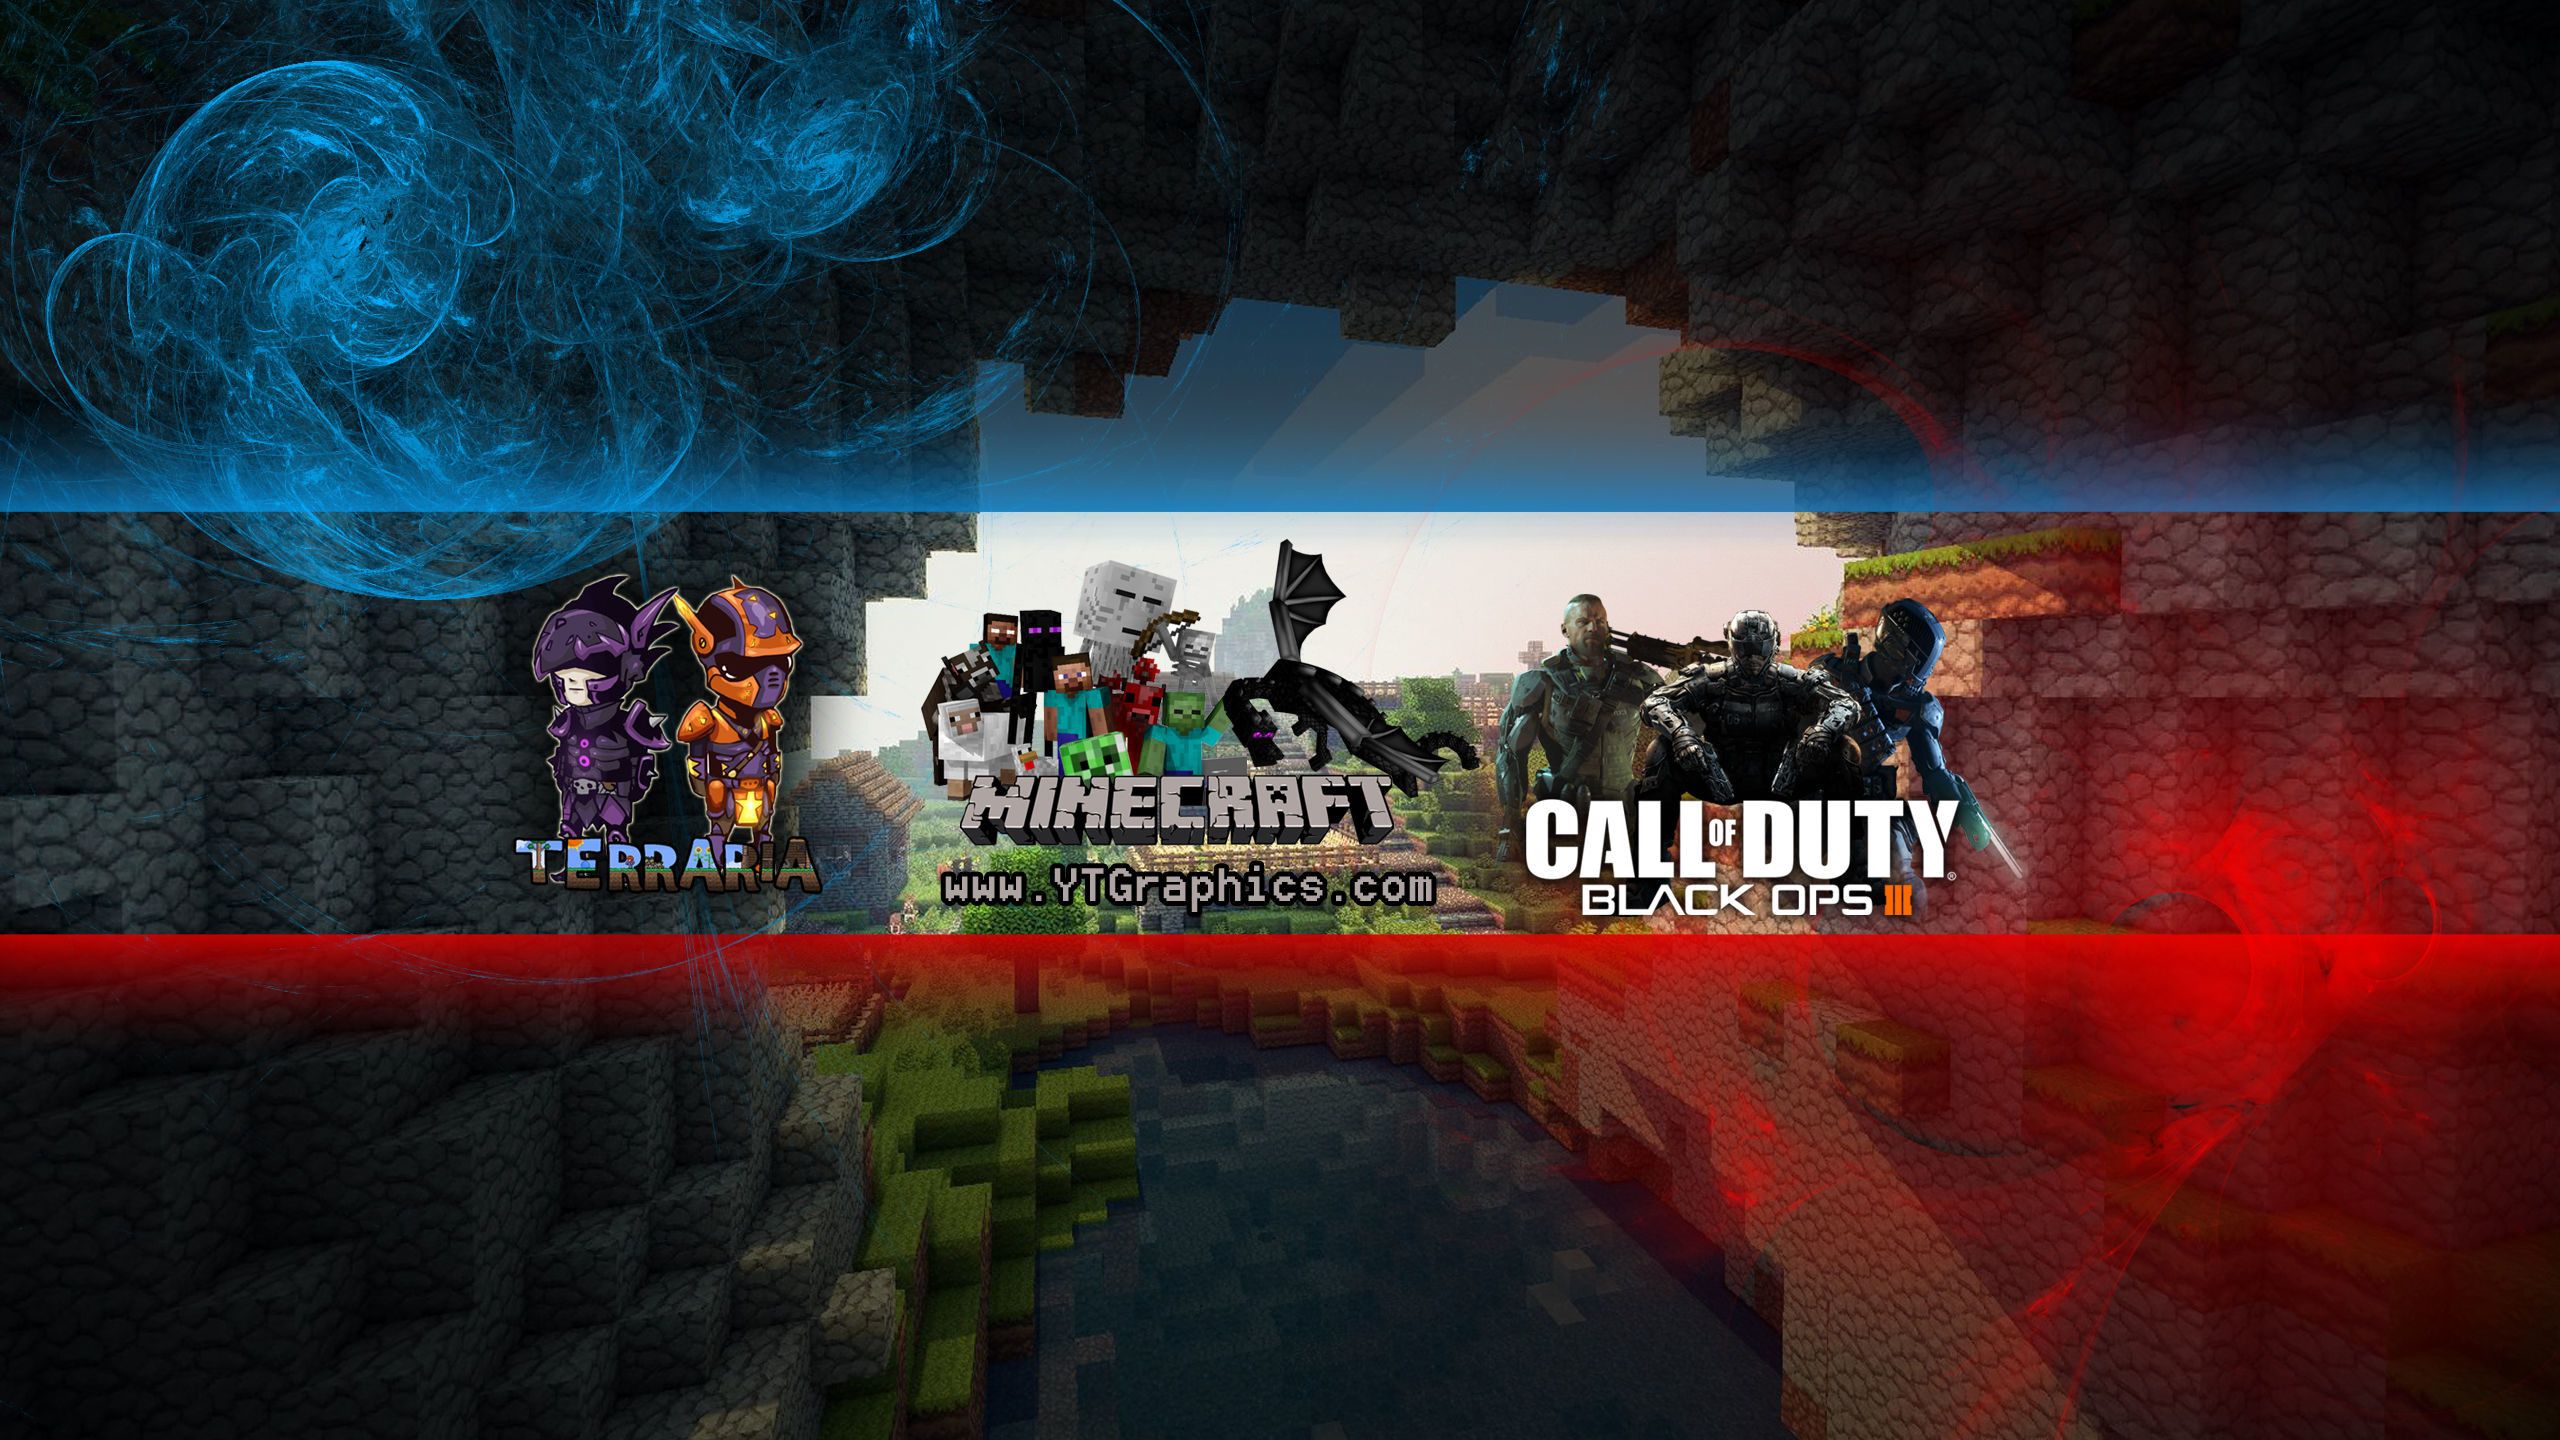 youtube-gaming-banner-background-hd-gaming-banner-wallpaper-wallpapers